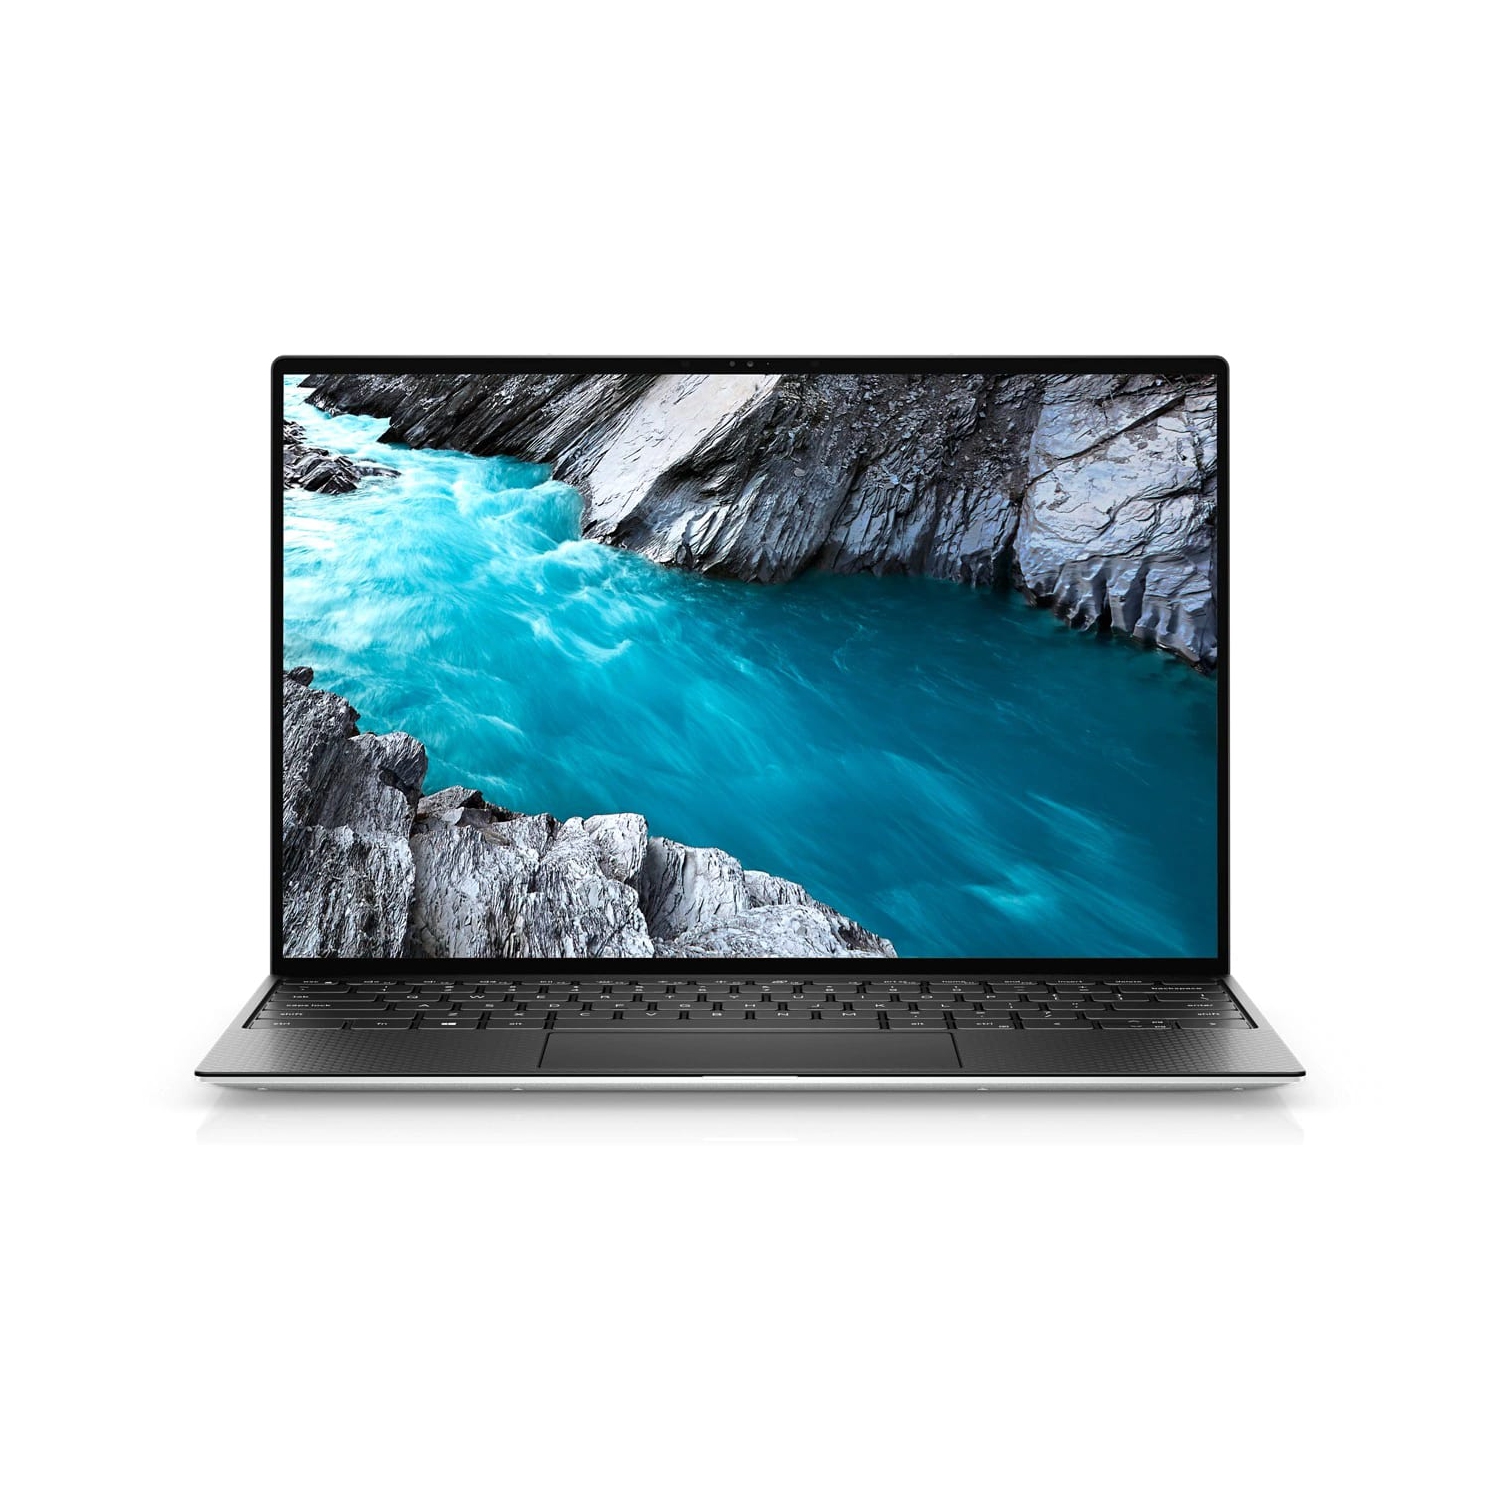 Refurbished (Excellent) - Dell XPS 13 9310 Laptop (2020) | 13.4" FHD+ Touch | Core i7 - 2TB SSD - 16GB RAM | 4 Cores @ 4.4 GHz - 11th Gen CPU Certified Refurbished